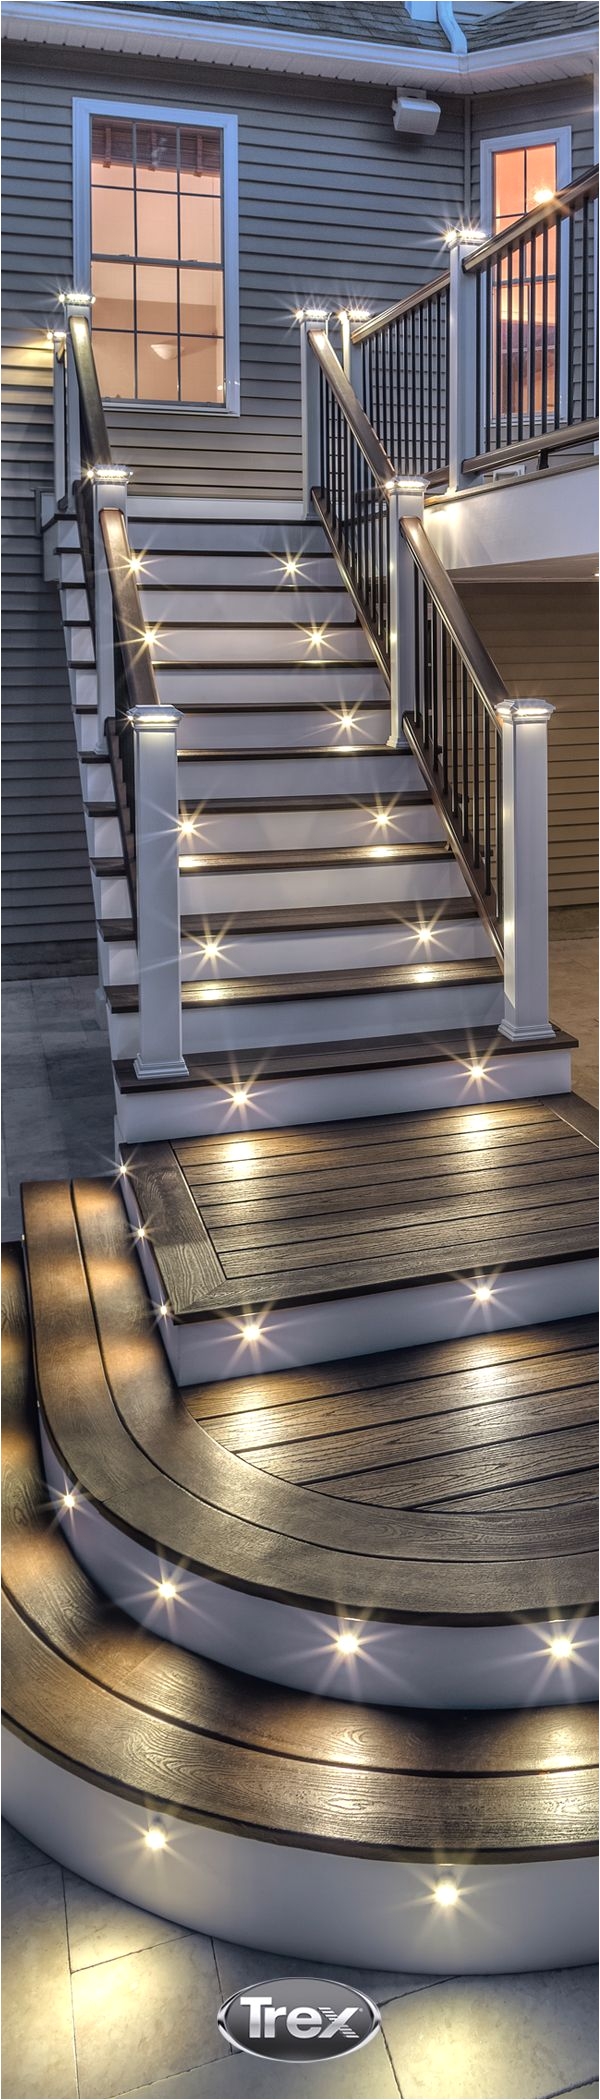 create a little drama on your deck with deck lighting installed on stair risers and railing